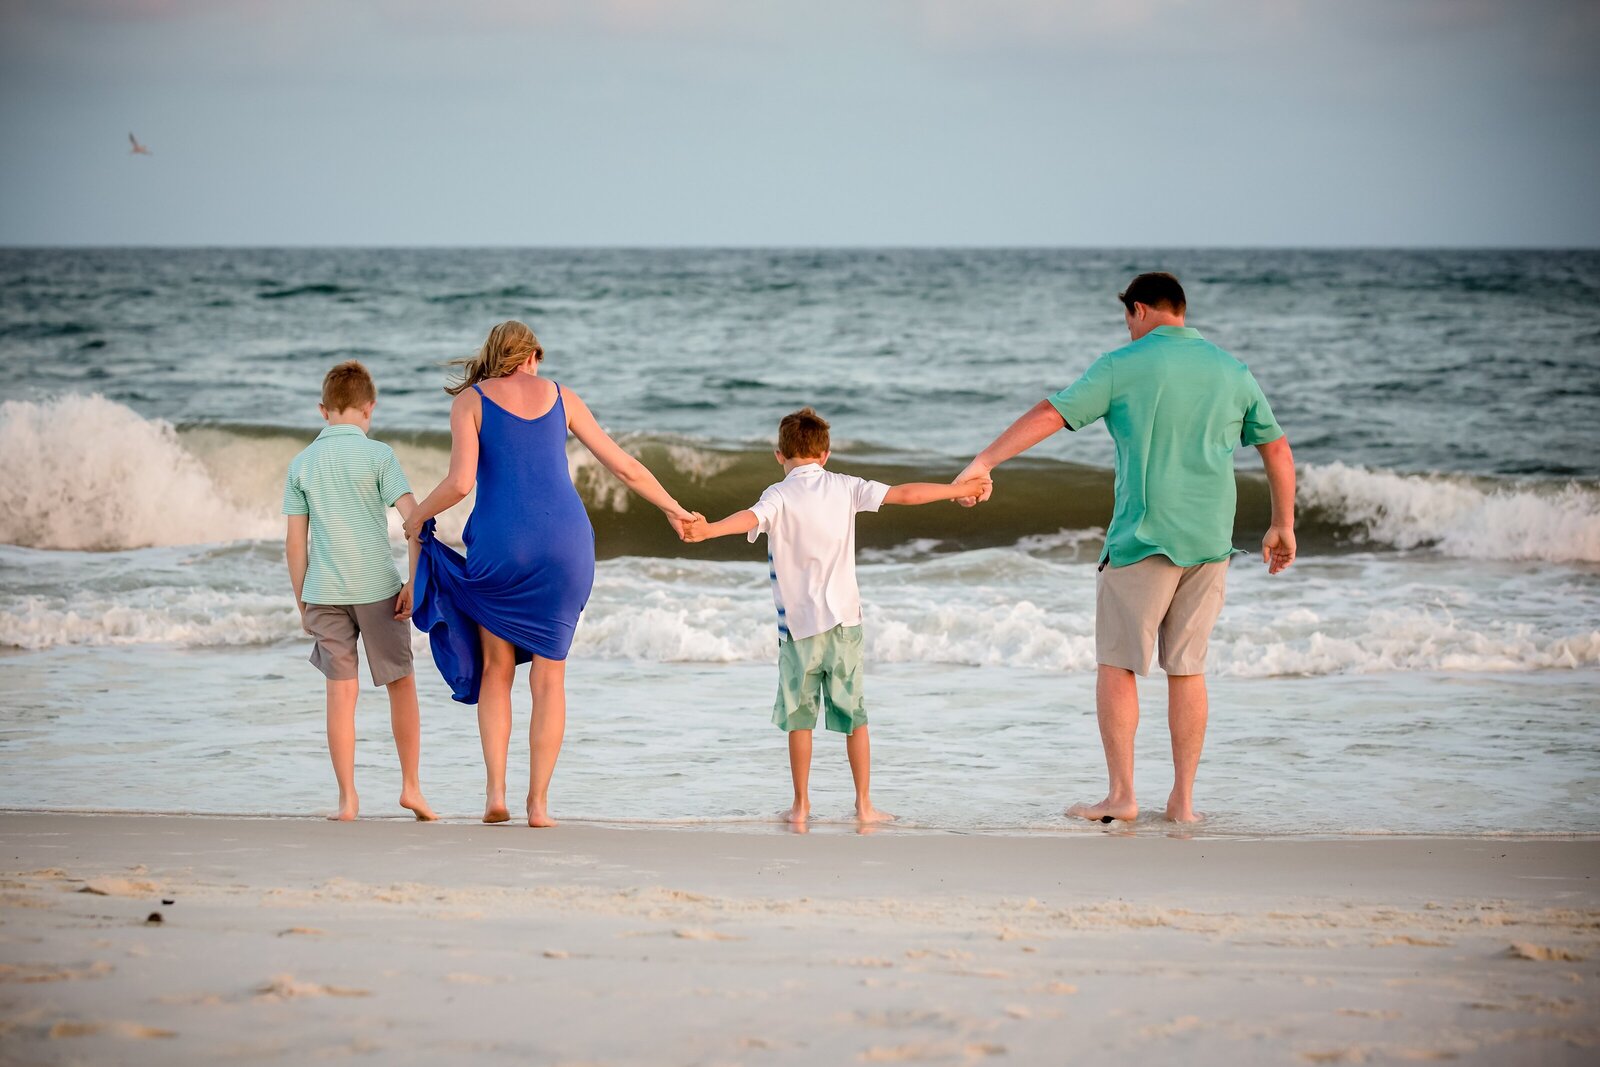 Pensacola Photography session during family vacation on Pensacola Beach . Family playing together in the water at sunset.